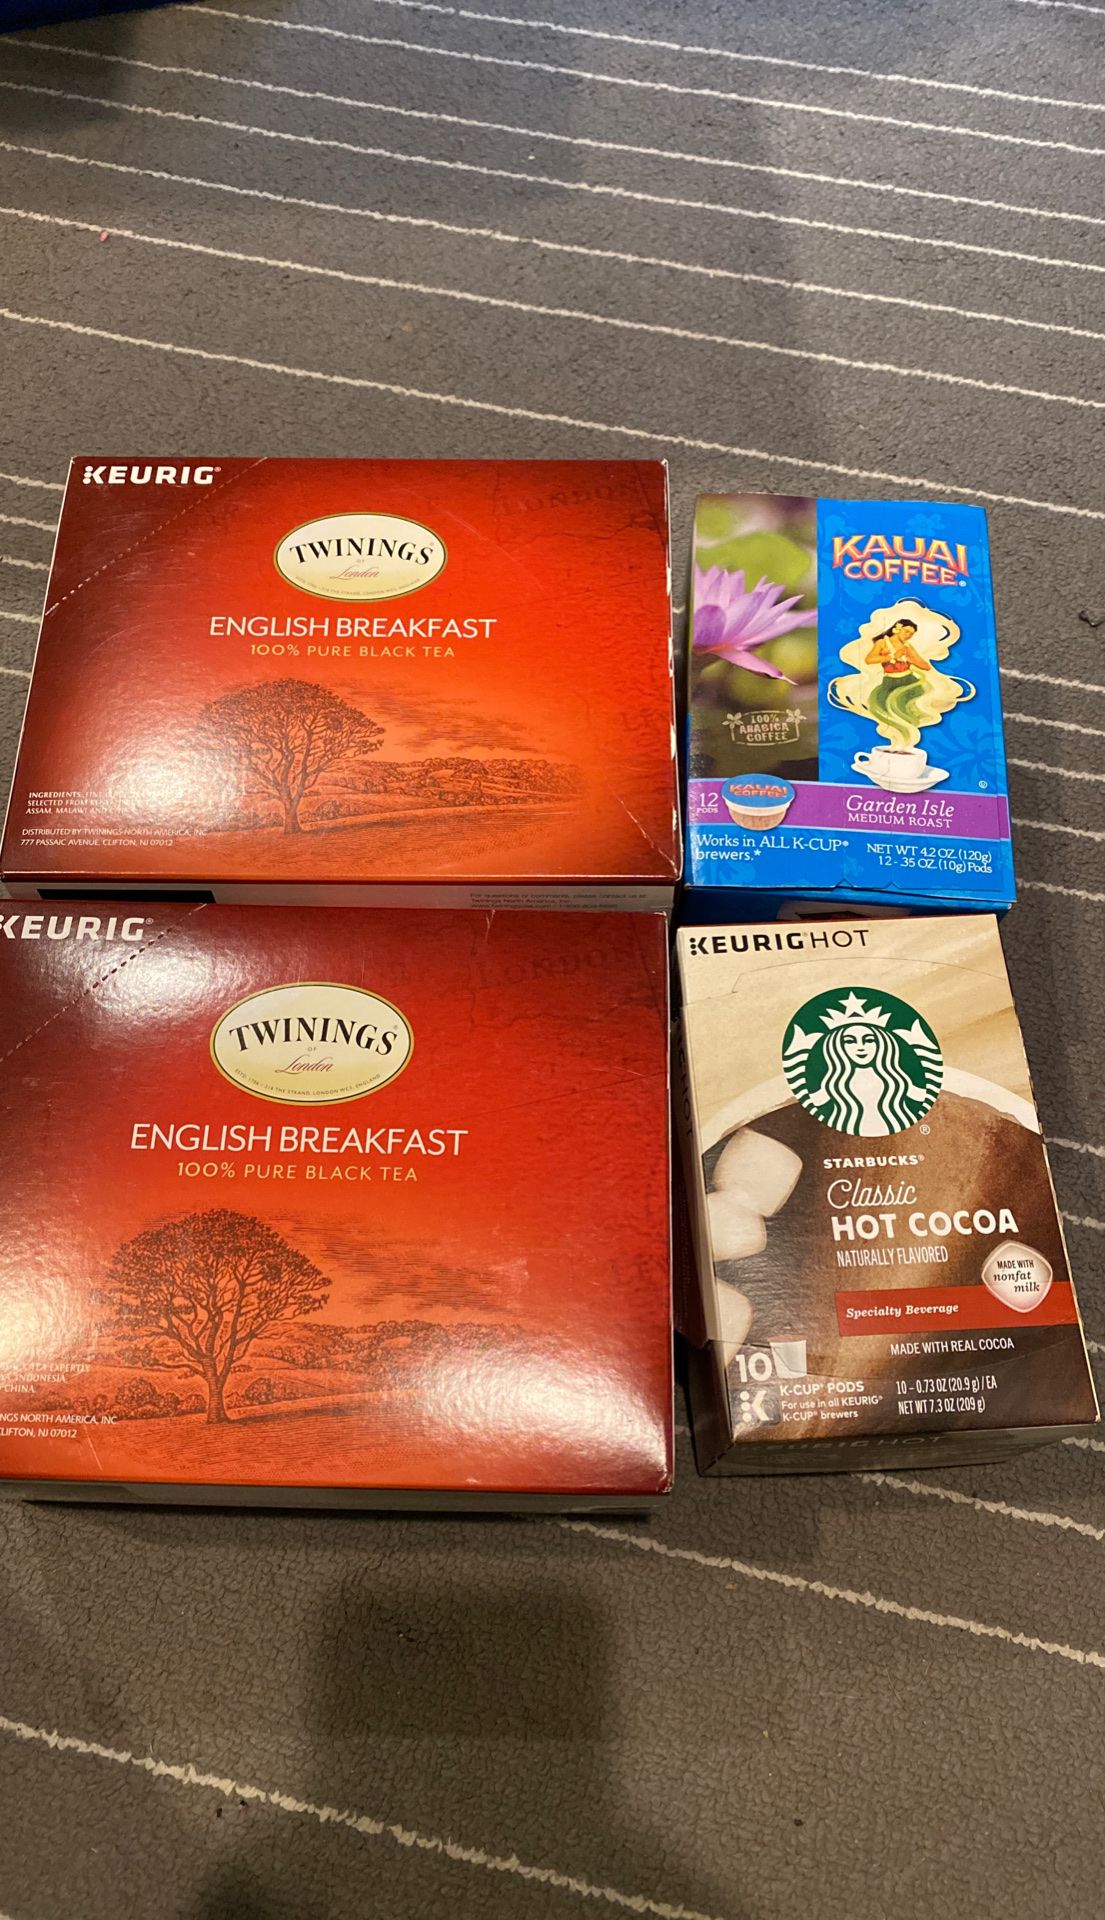 Keurig pods - mix of tea, coffee, and hot chocolate